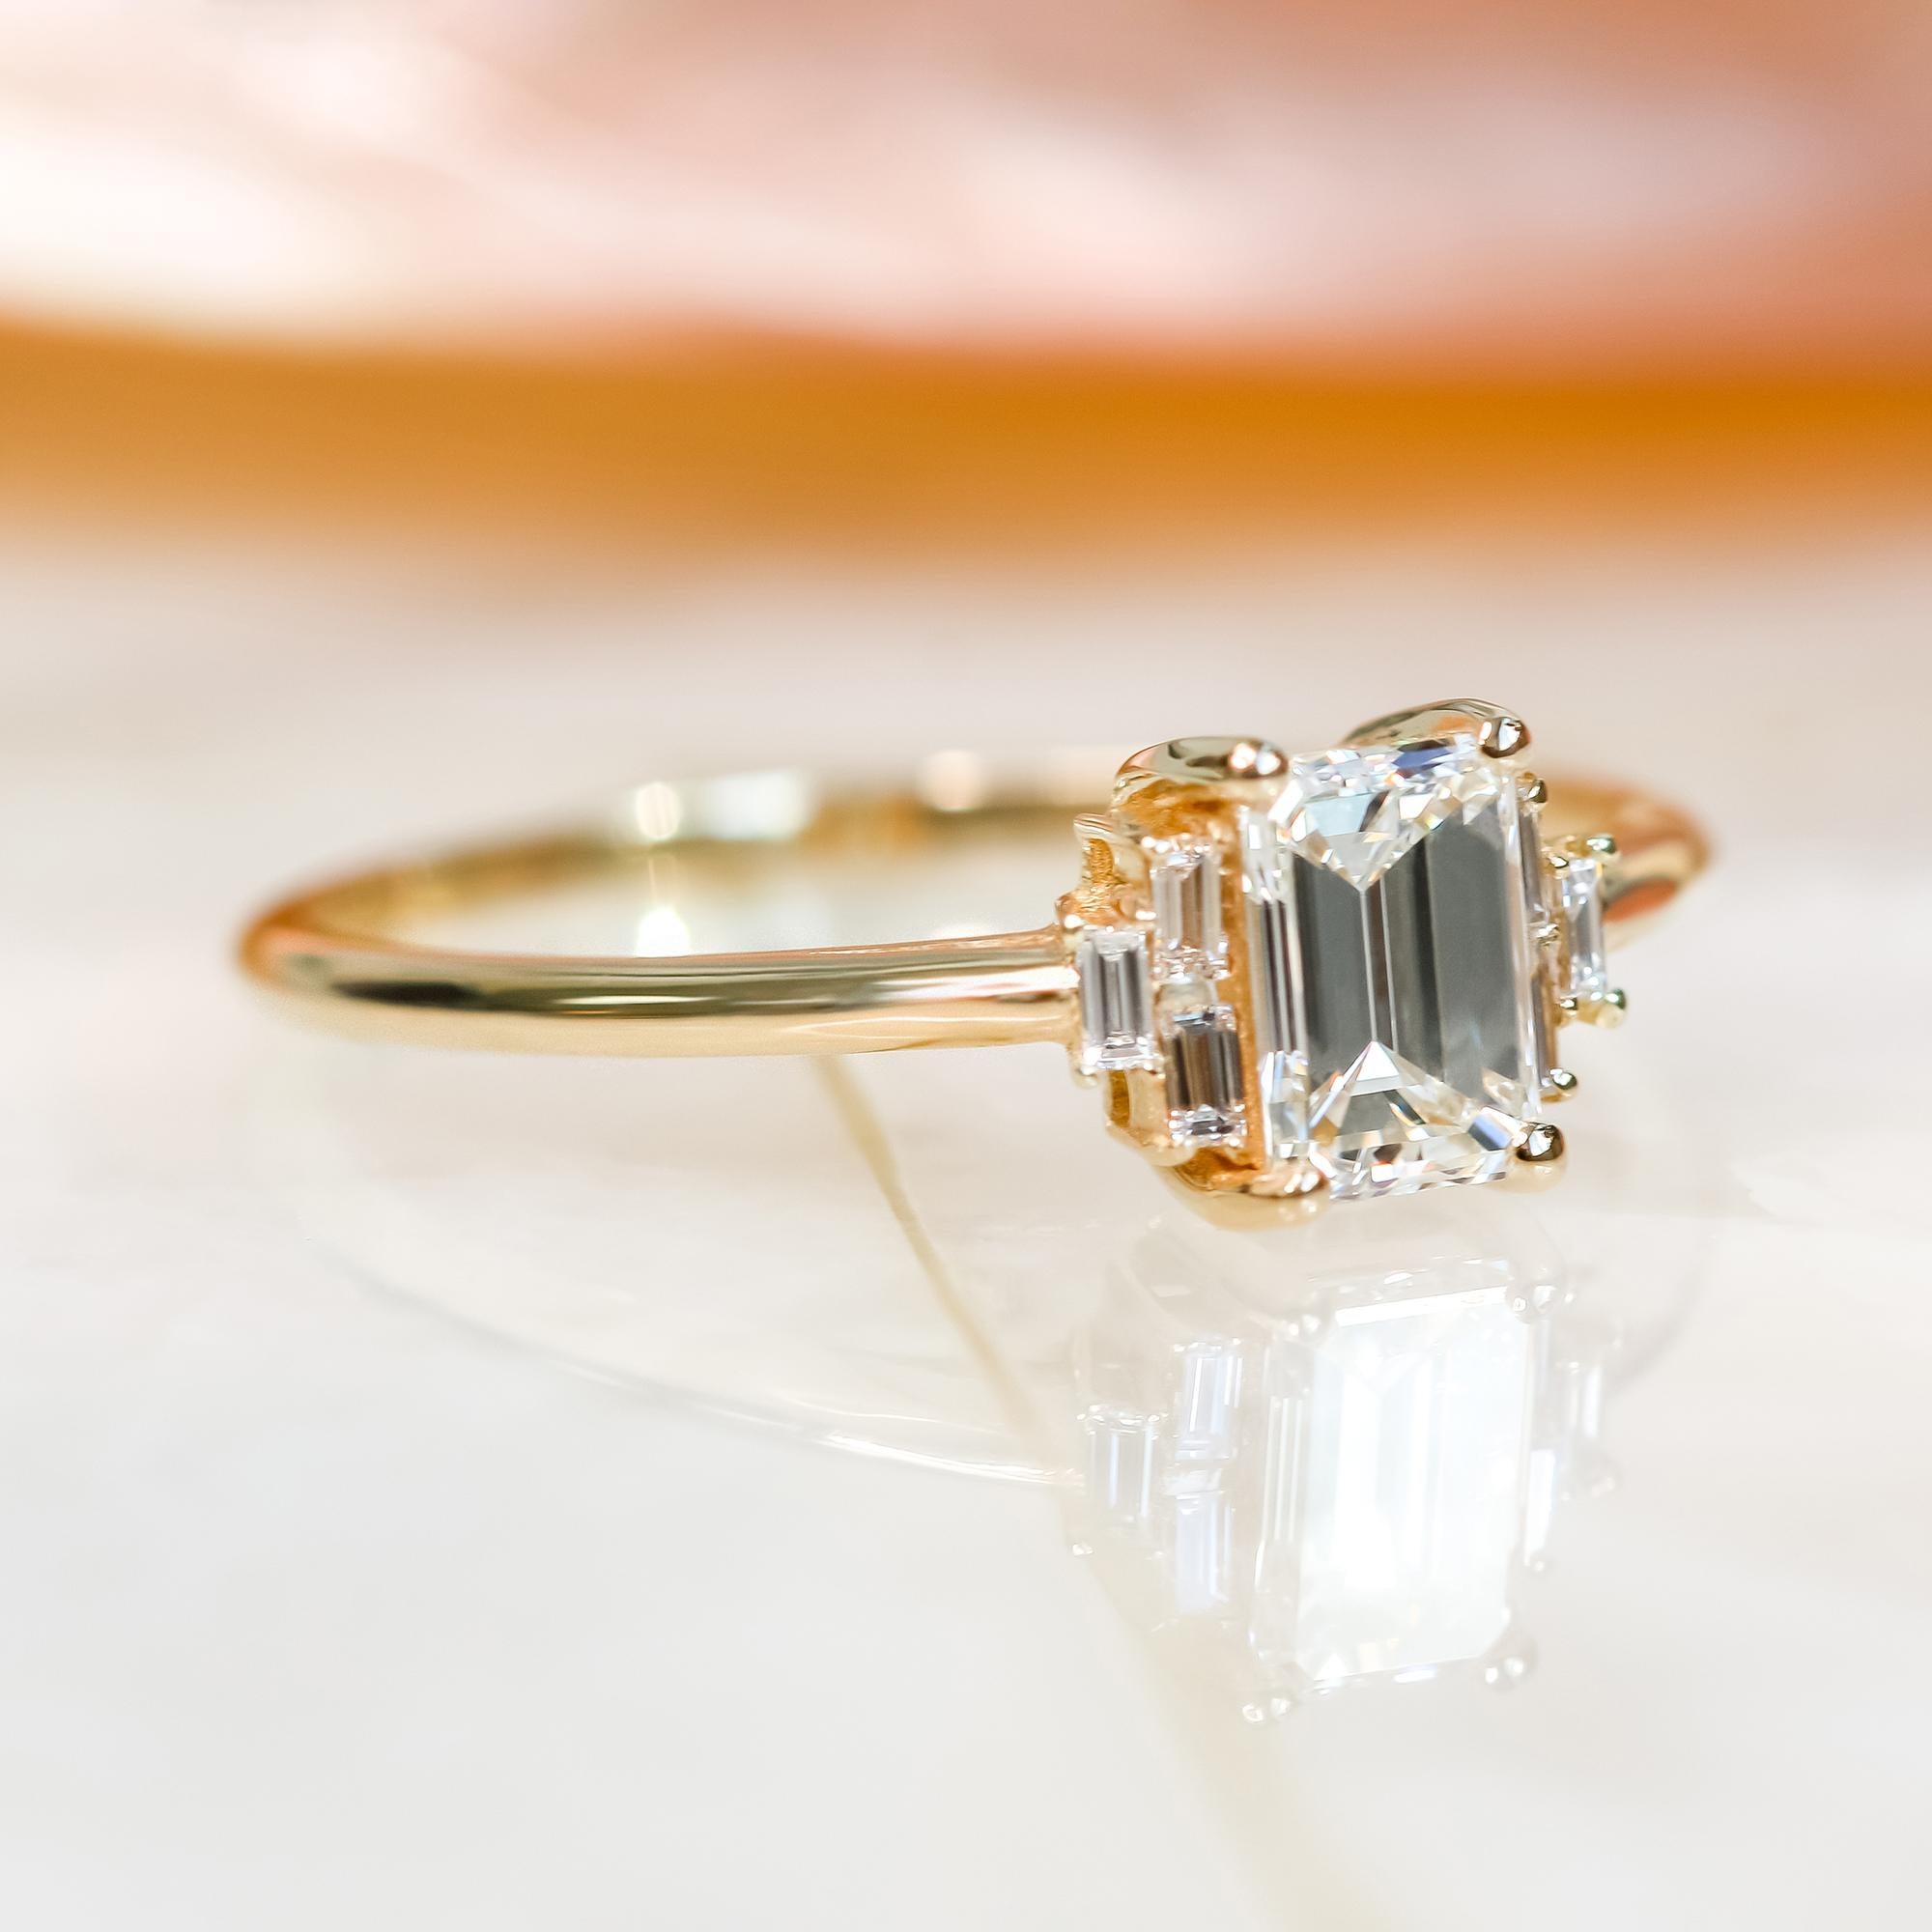 GIA 1.11 Cts Natural Emerald Cut Art-Deco Diamond Ring, Complimentary Baguettes 

**Our diamonds are 100% natural earth mined**

Diana Rafael's signature design is set with one of the most brilliant, shiny step-cut diamonds out there. This Emerald